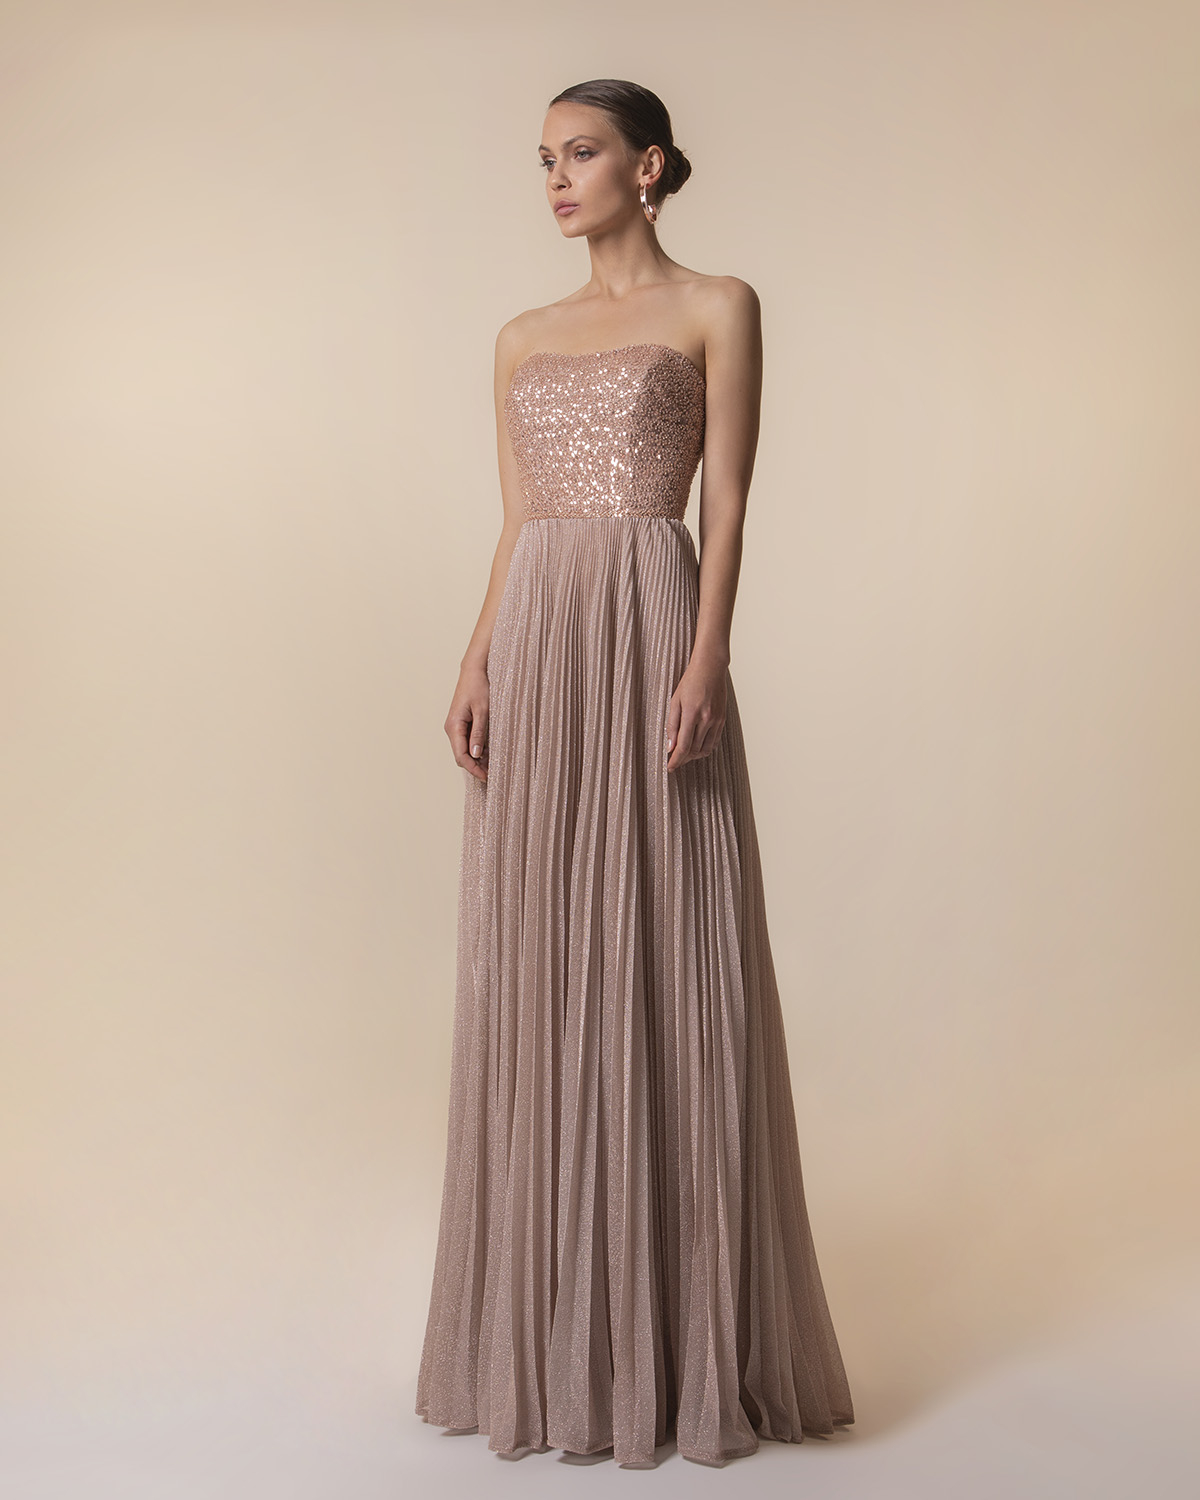 Evening Dresses / Long strapless evening dress with fully beaded top